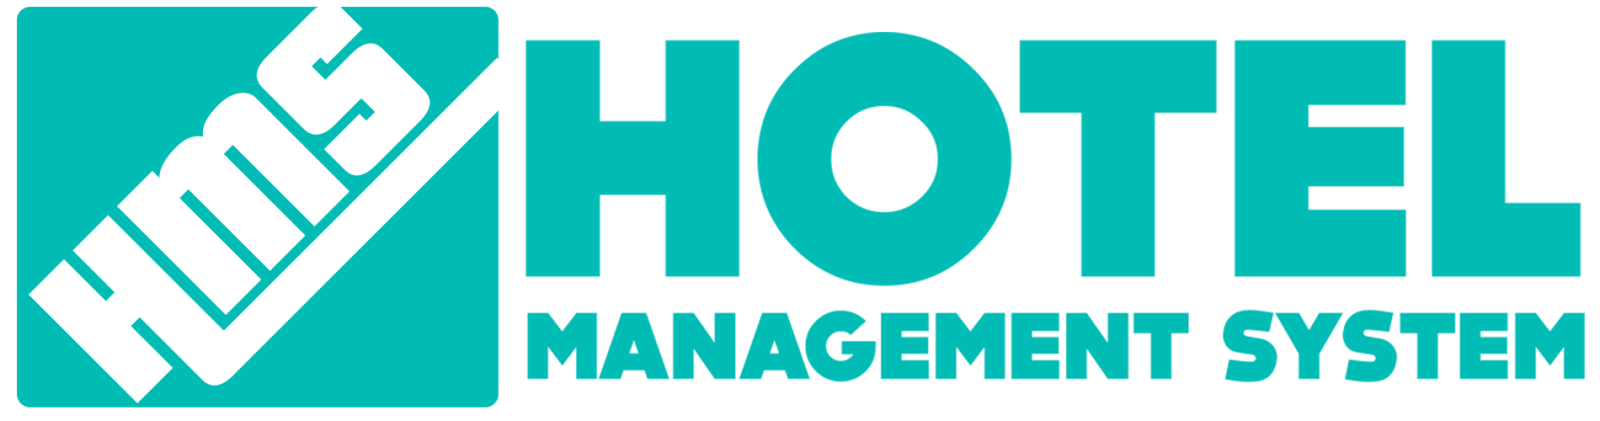 Harnessing the Power of Hotel Management Systems: A Deep Dive into HMS Software